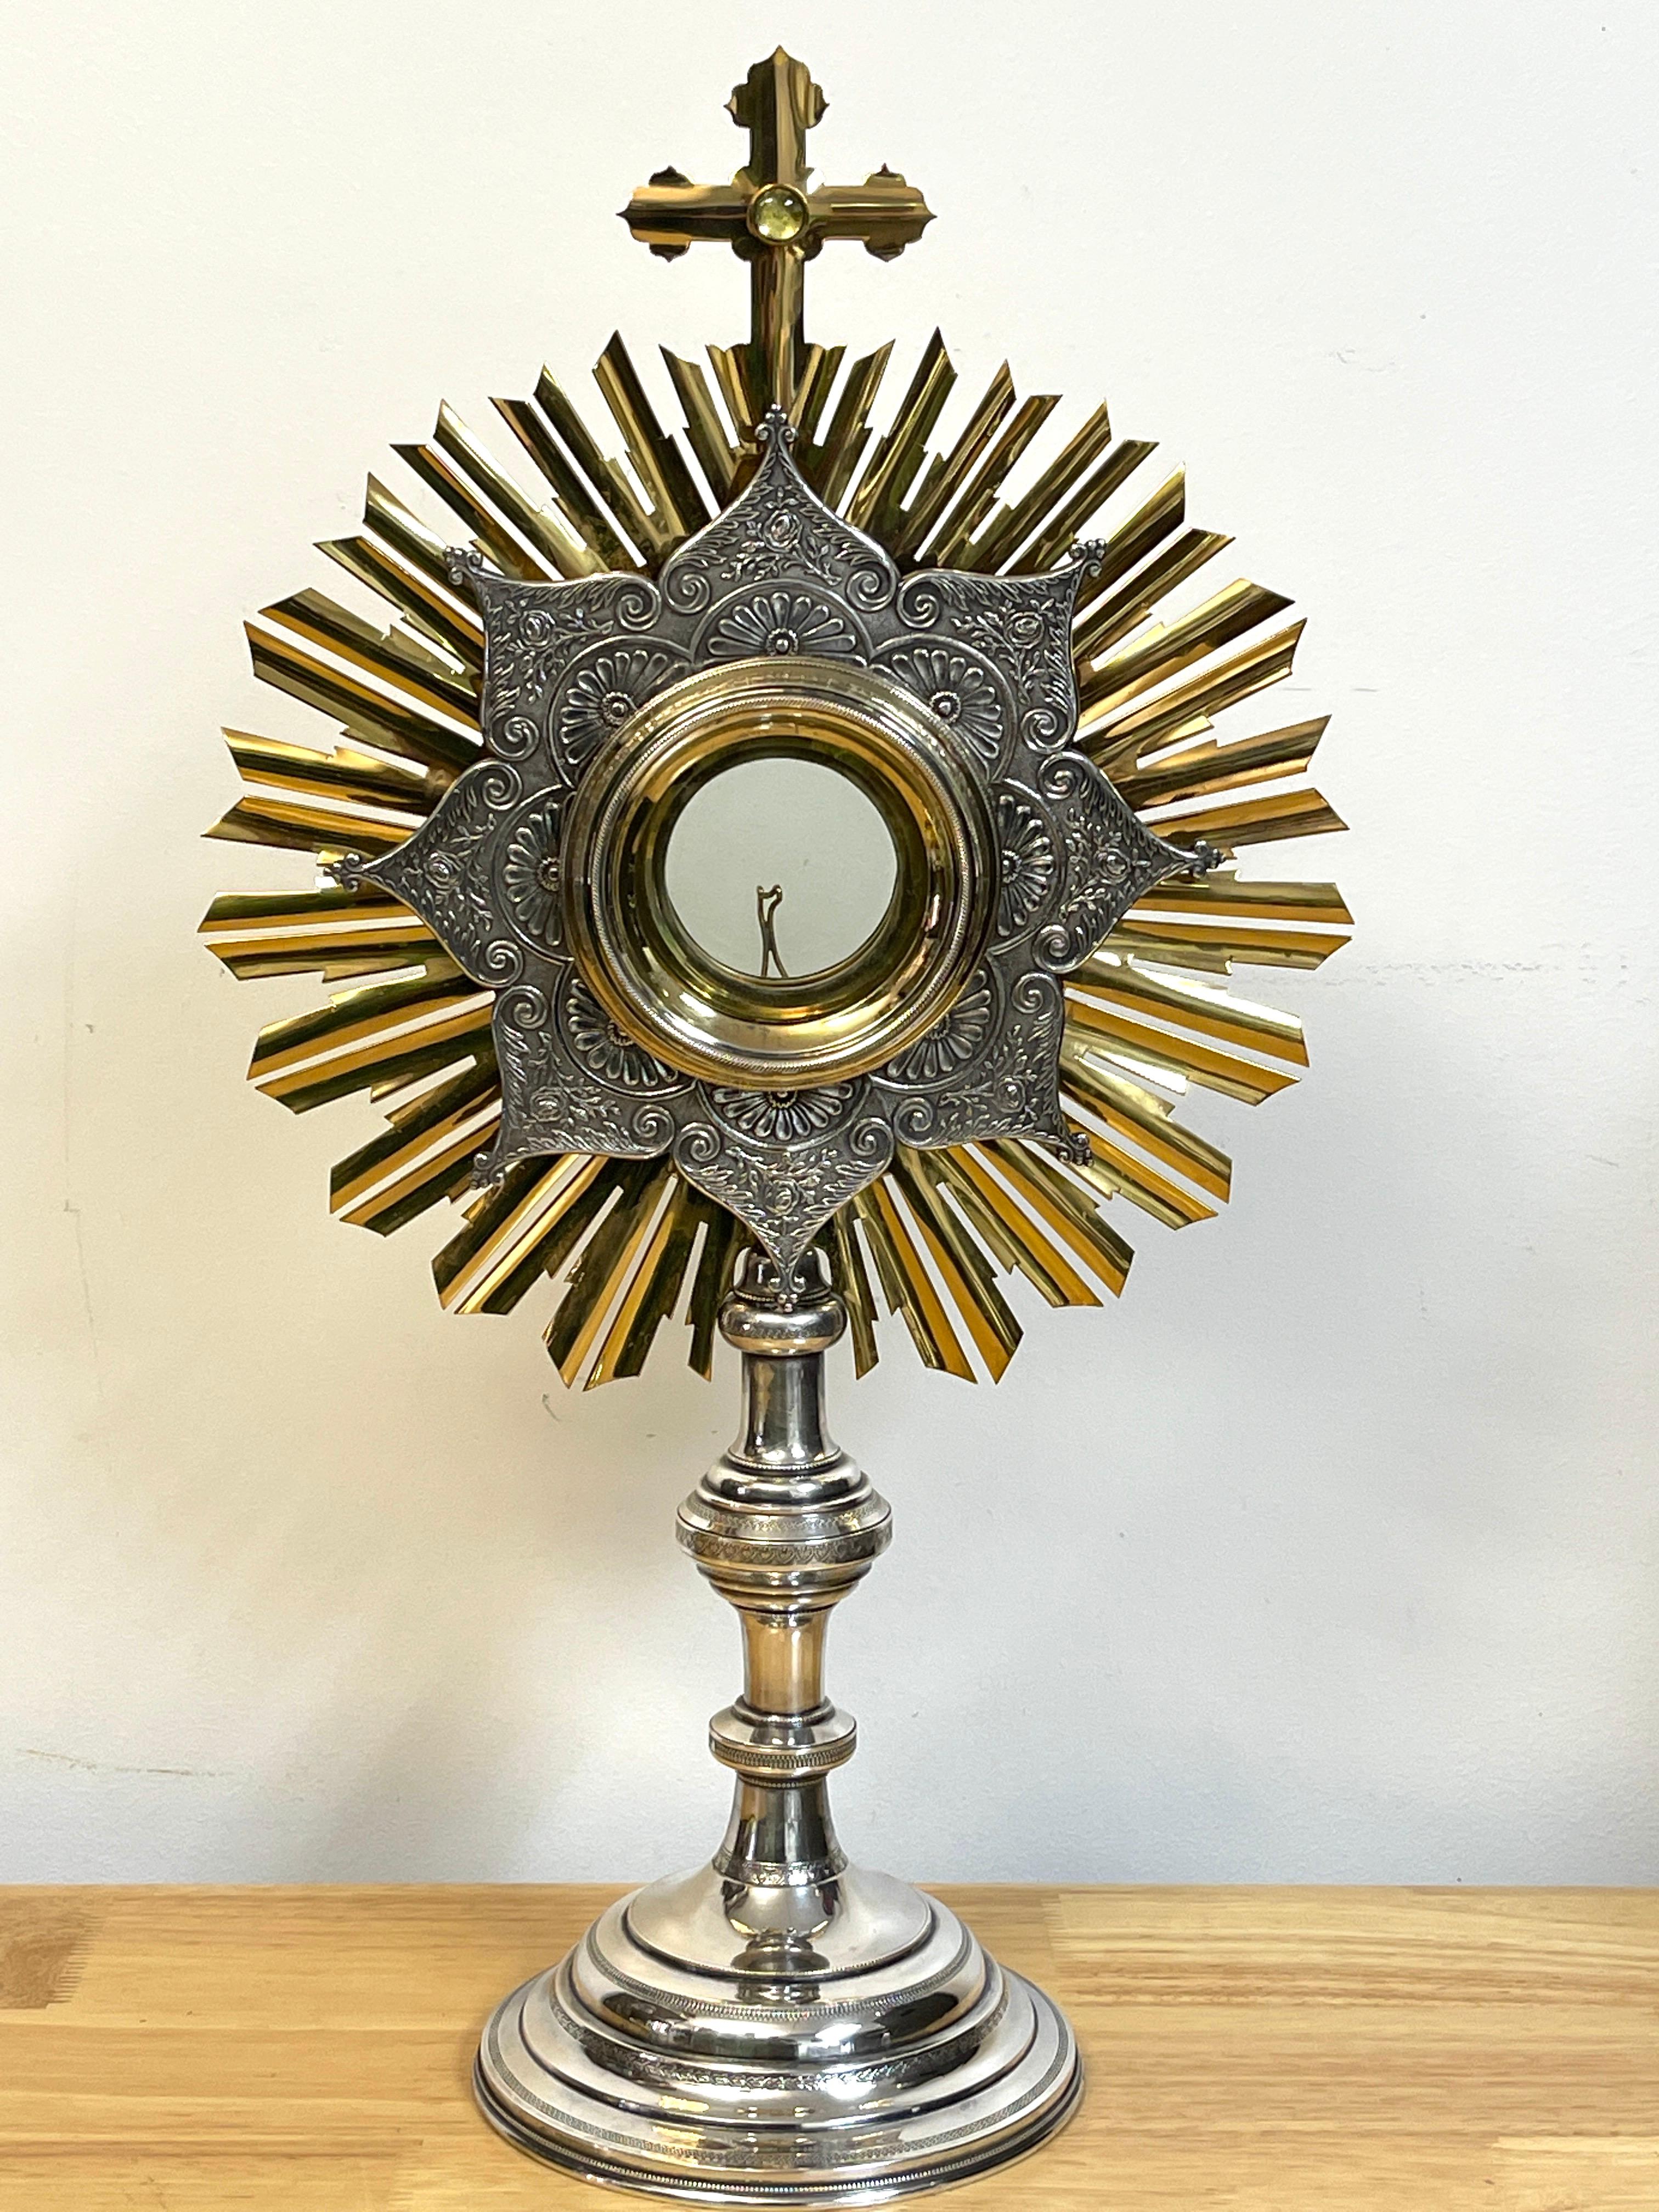 Russian silver & gilt bronze monstrance /reliquary, with a jewel set Cross atop a gilt bronze sunburst with inset repouse silver interior, revealing the removable crystal Luna. Raised on engine turned Russian Silver 864 pedestal base. Stamped '864'.